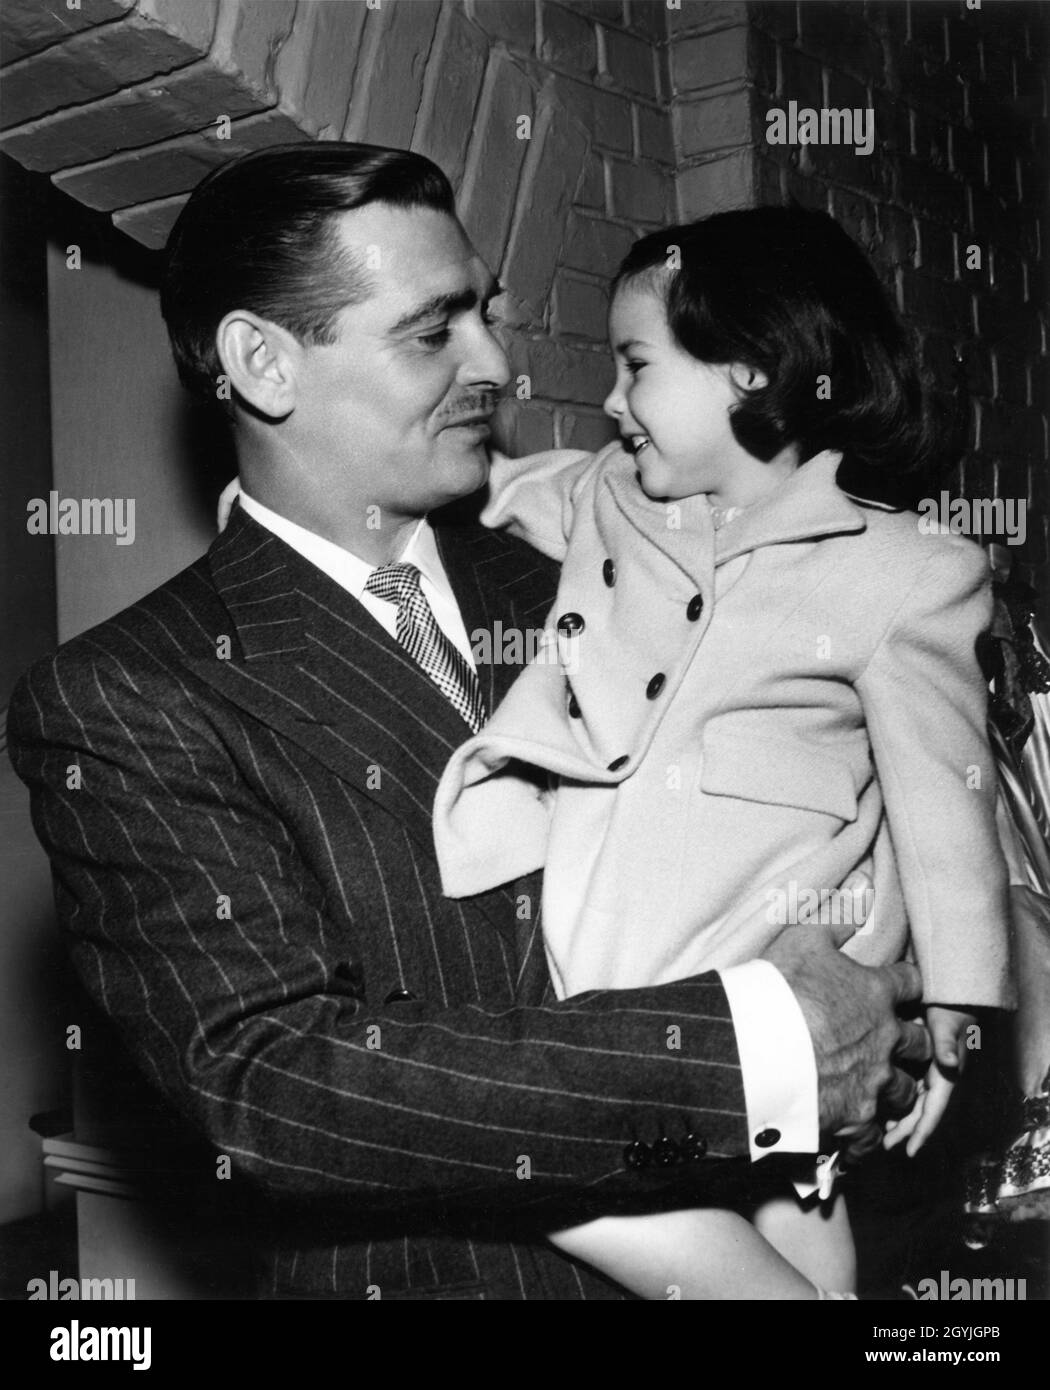 CLARK GABLE on set candid with 3 year old child actress DIANE PERRINE (playing Deborah Kerr's daughter in the film) during filming of THE HUCKSTERS 1947 director JACK CONWAY novel Frederick Wakeman costume supervisor Irene producer Arthur Hornblow Jr. Metro Goldwyn Mayer Stock Photo